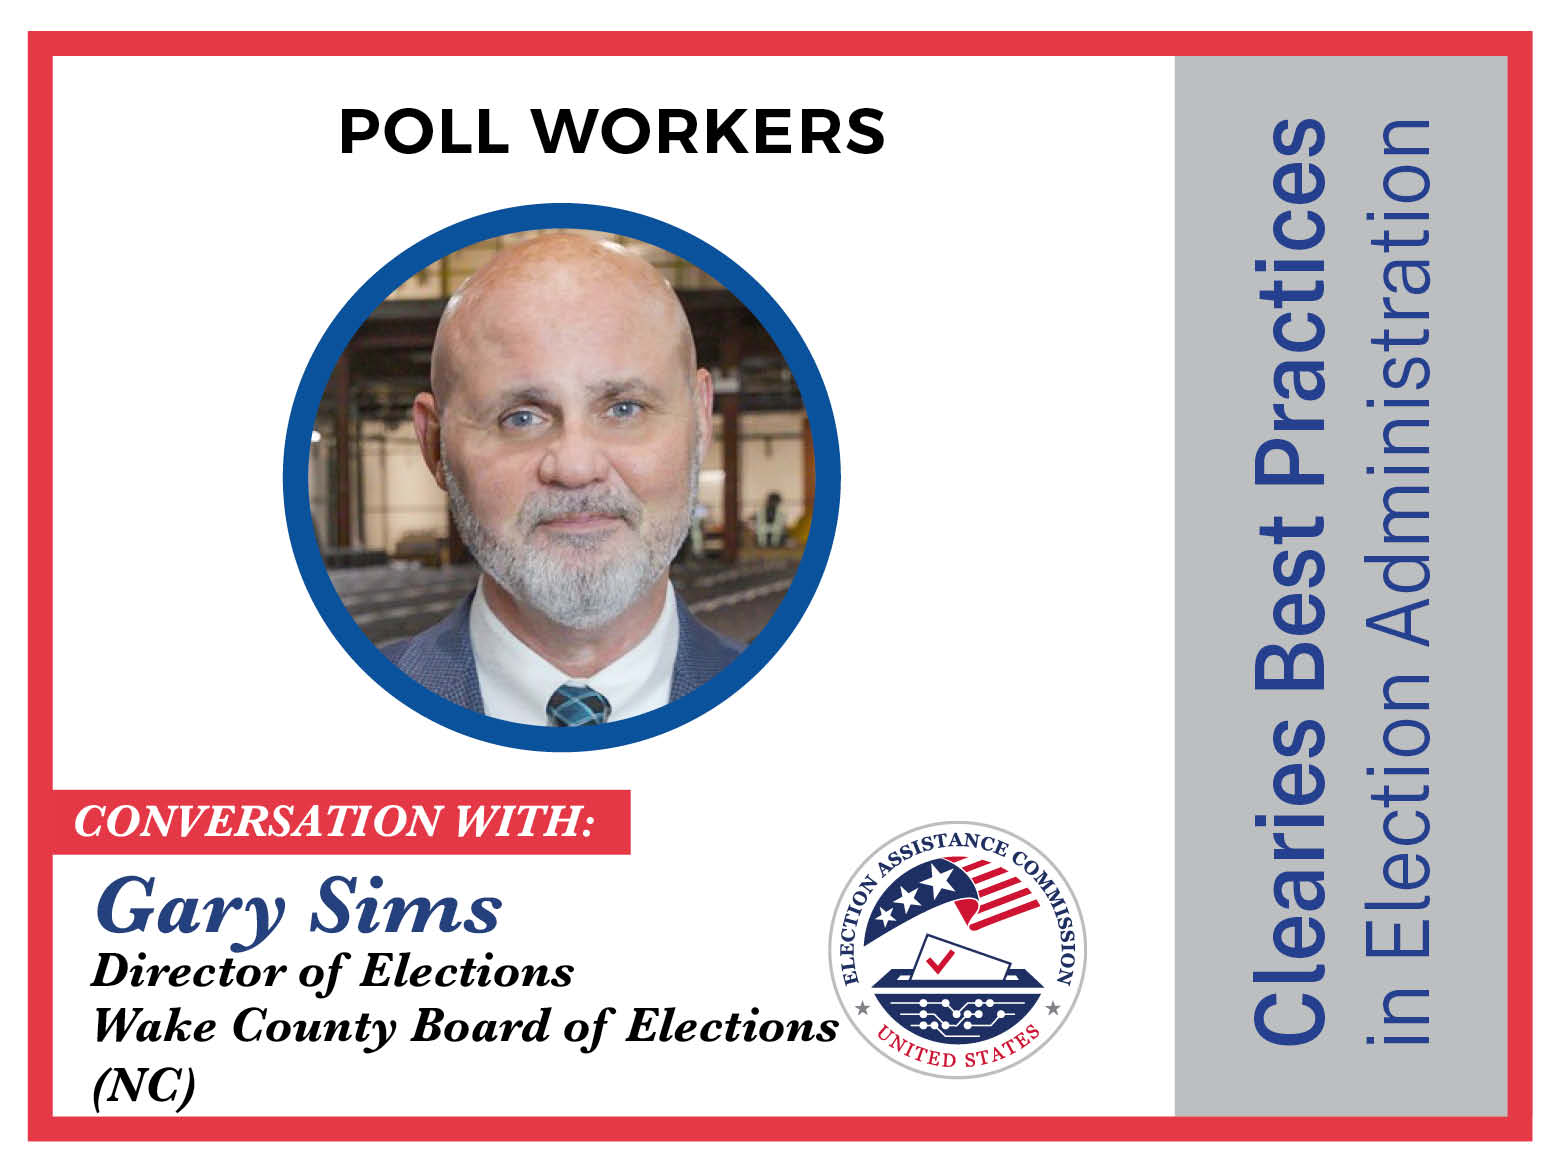 Clearies Best Practices conversation with Gary Sims Elections Director for Wake County Board of Elections